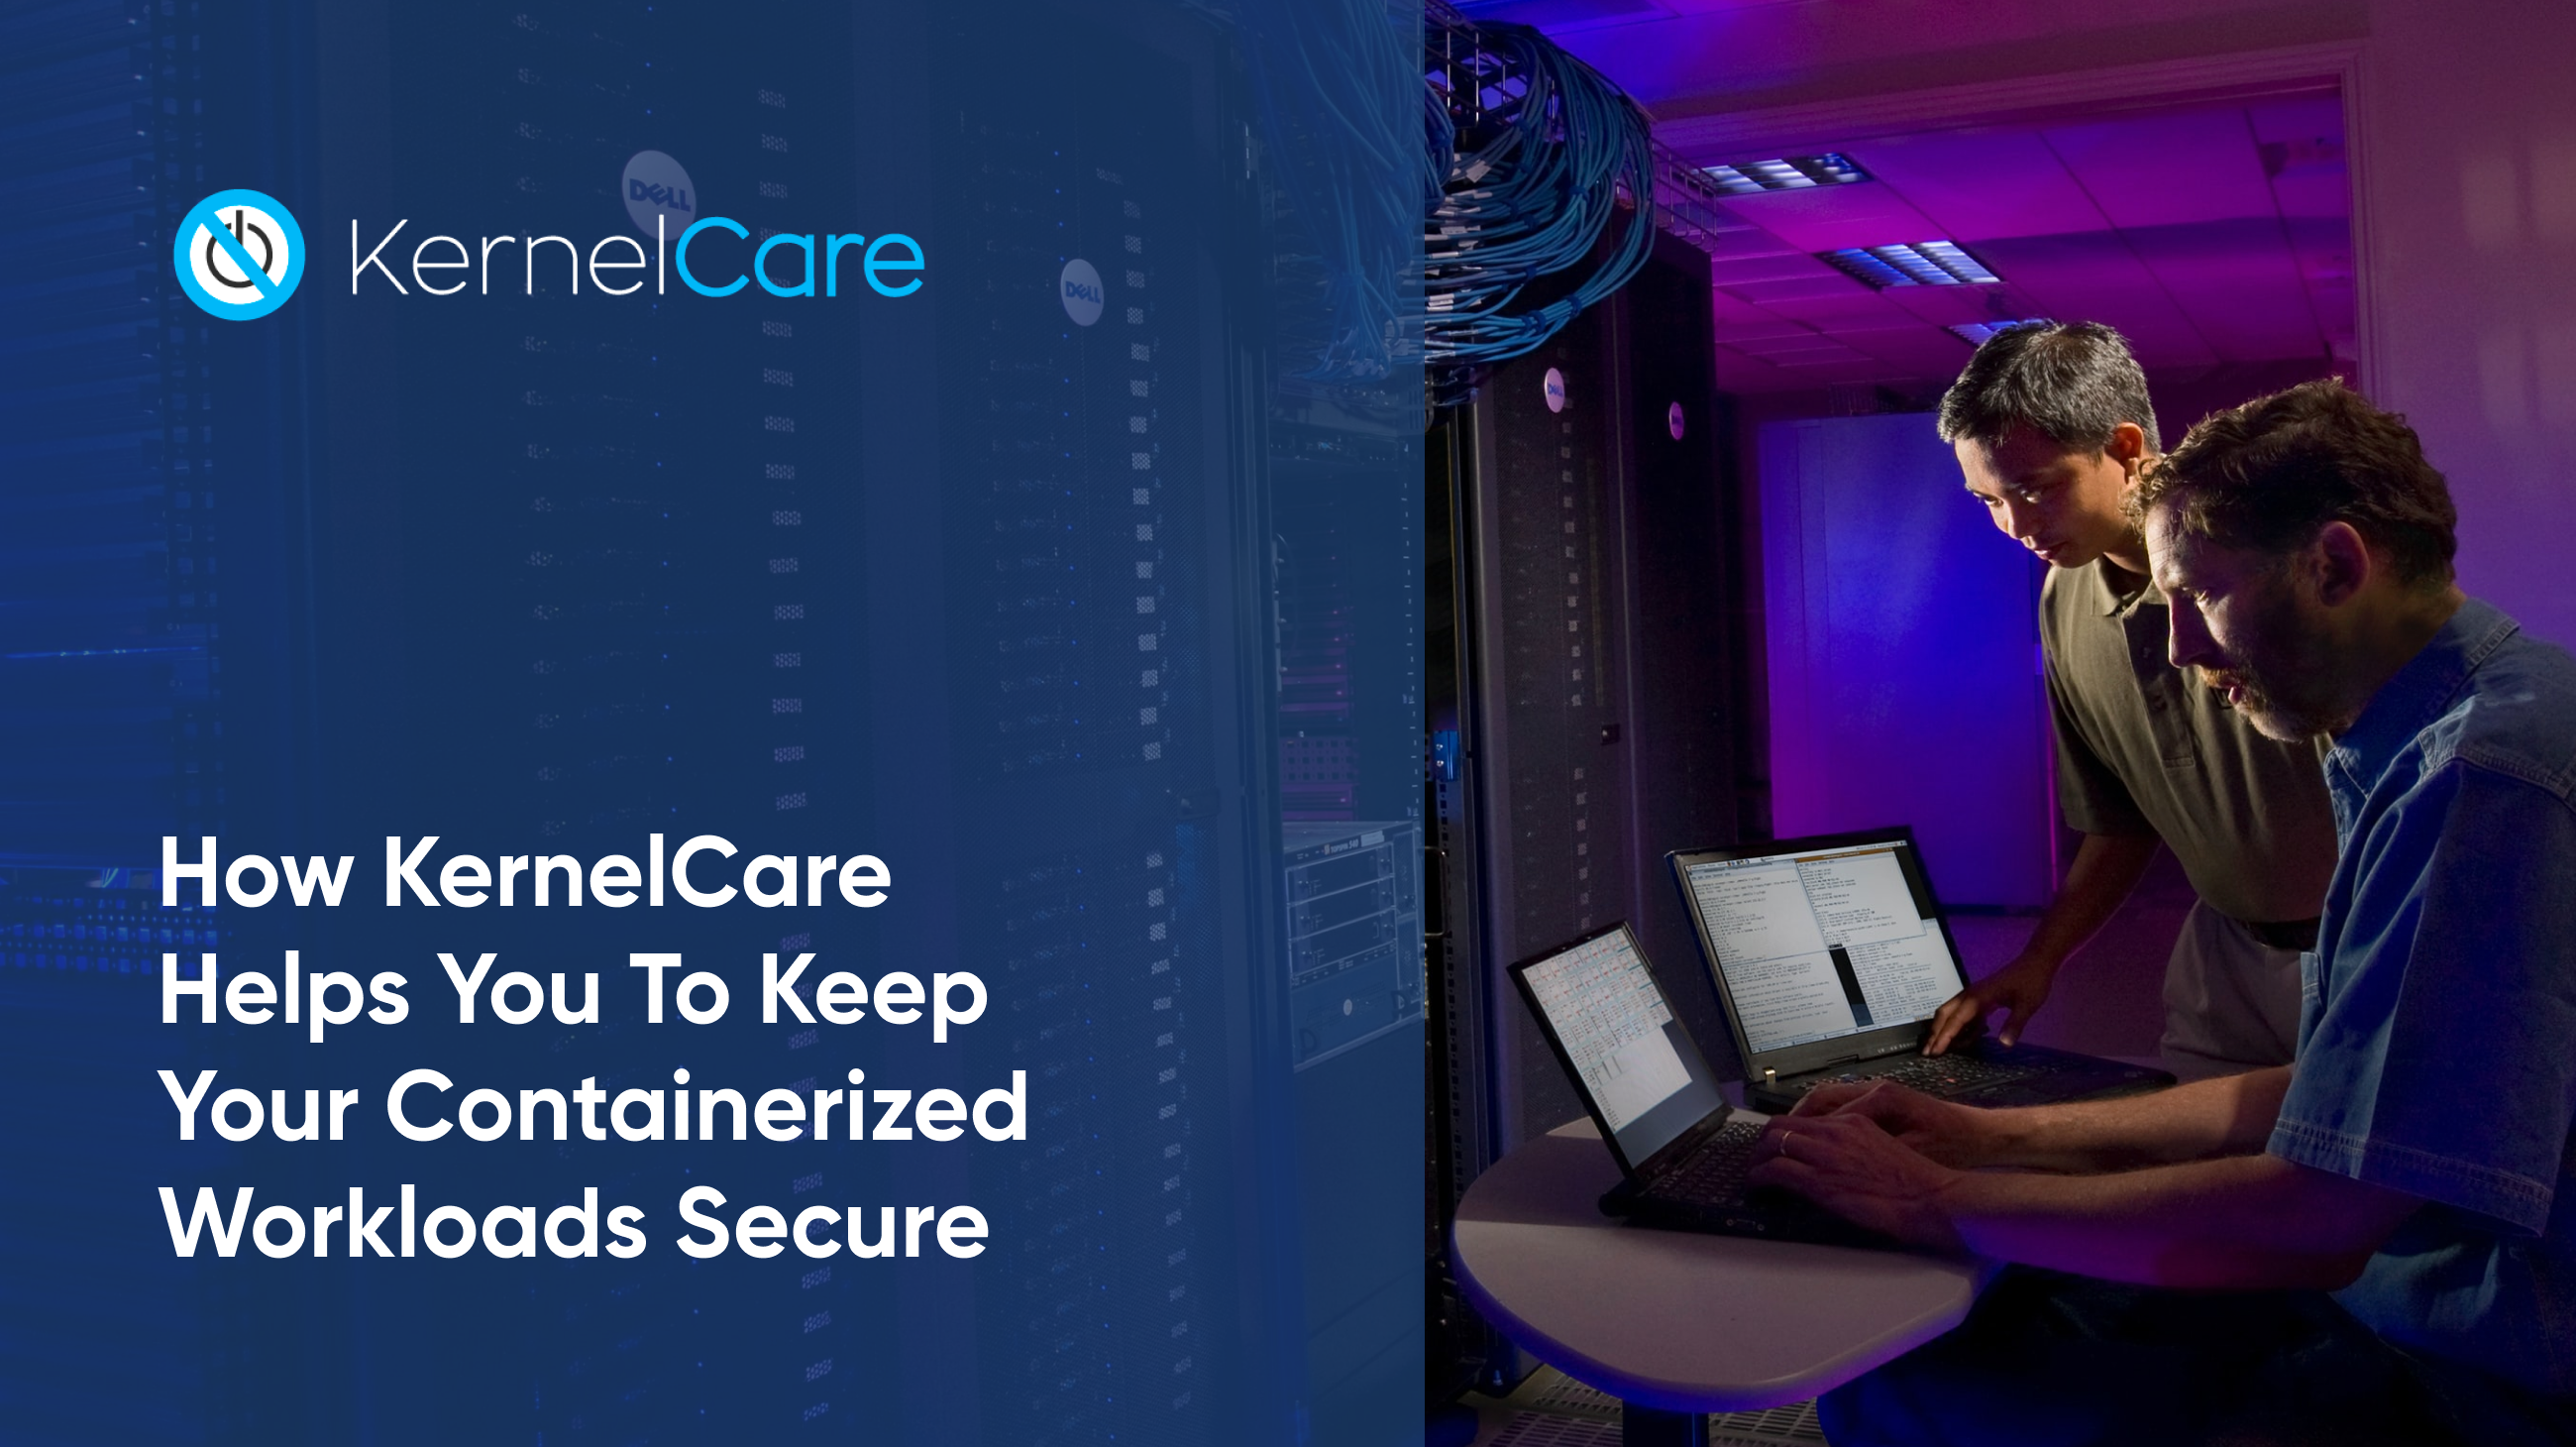 How KernelCare Helps You To Keep Your Containerized Workloads Secure